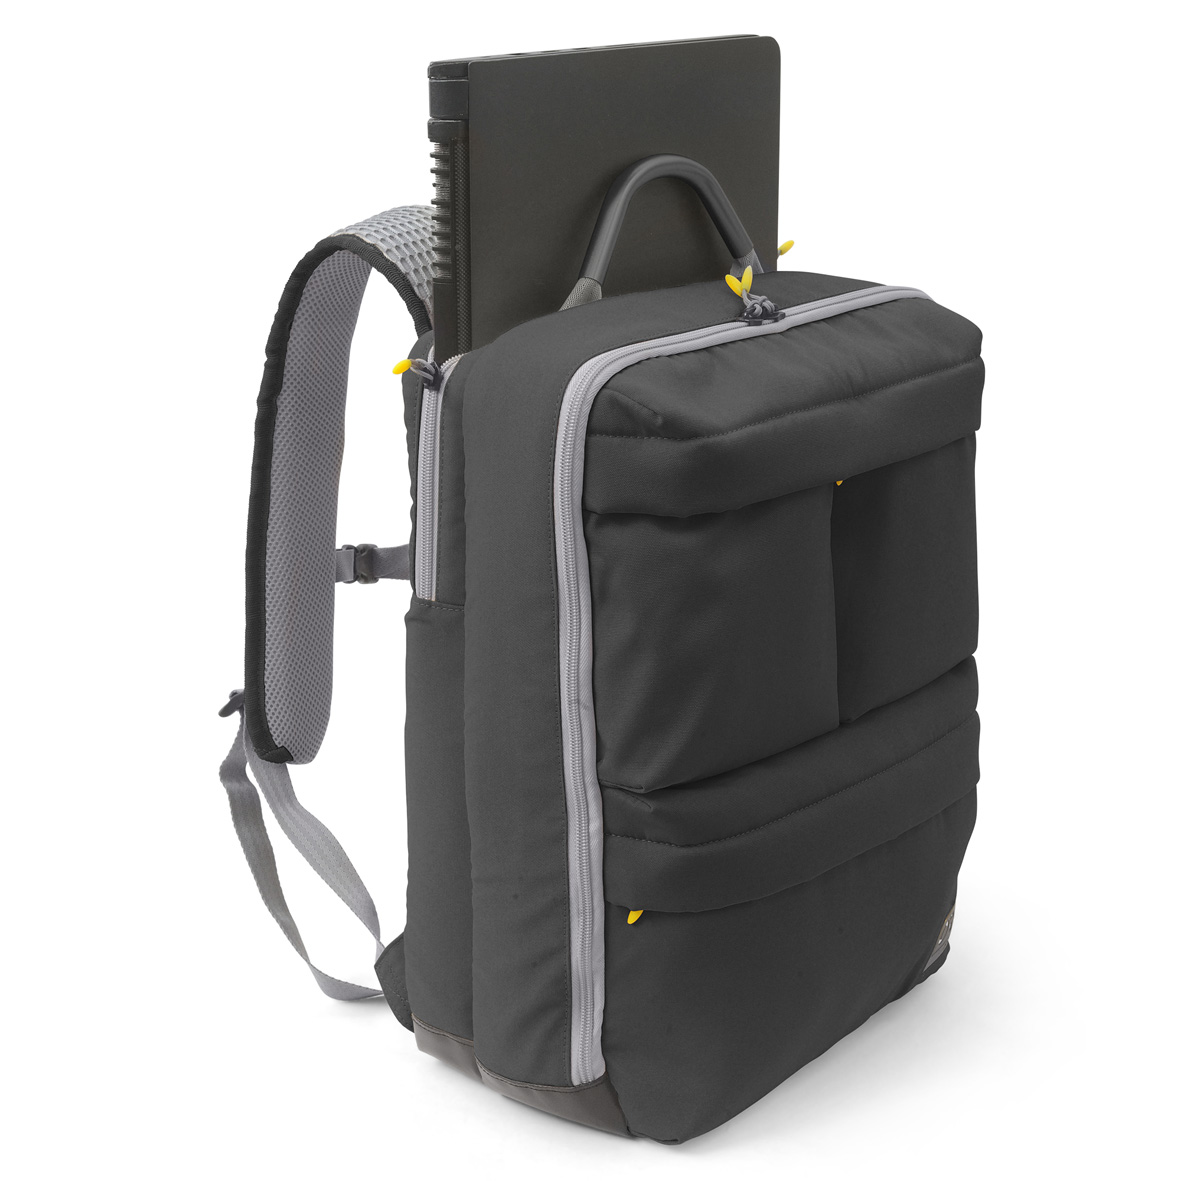 ORCA OR-554G Laptop Backpack for Daily Use Gray